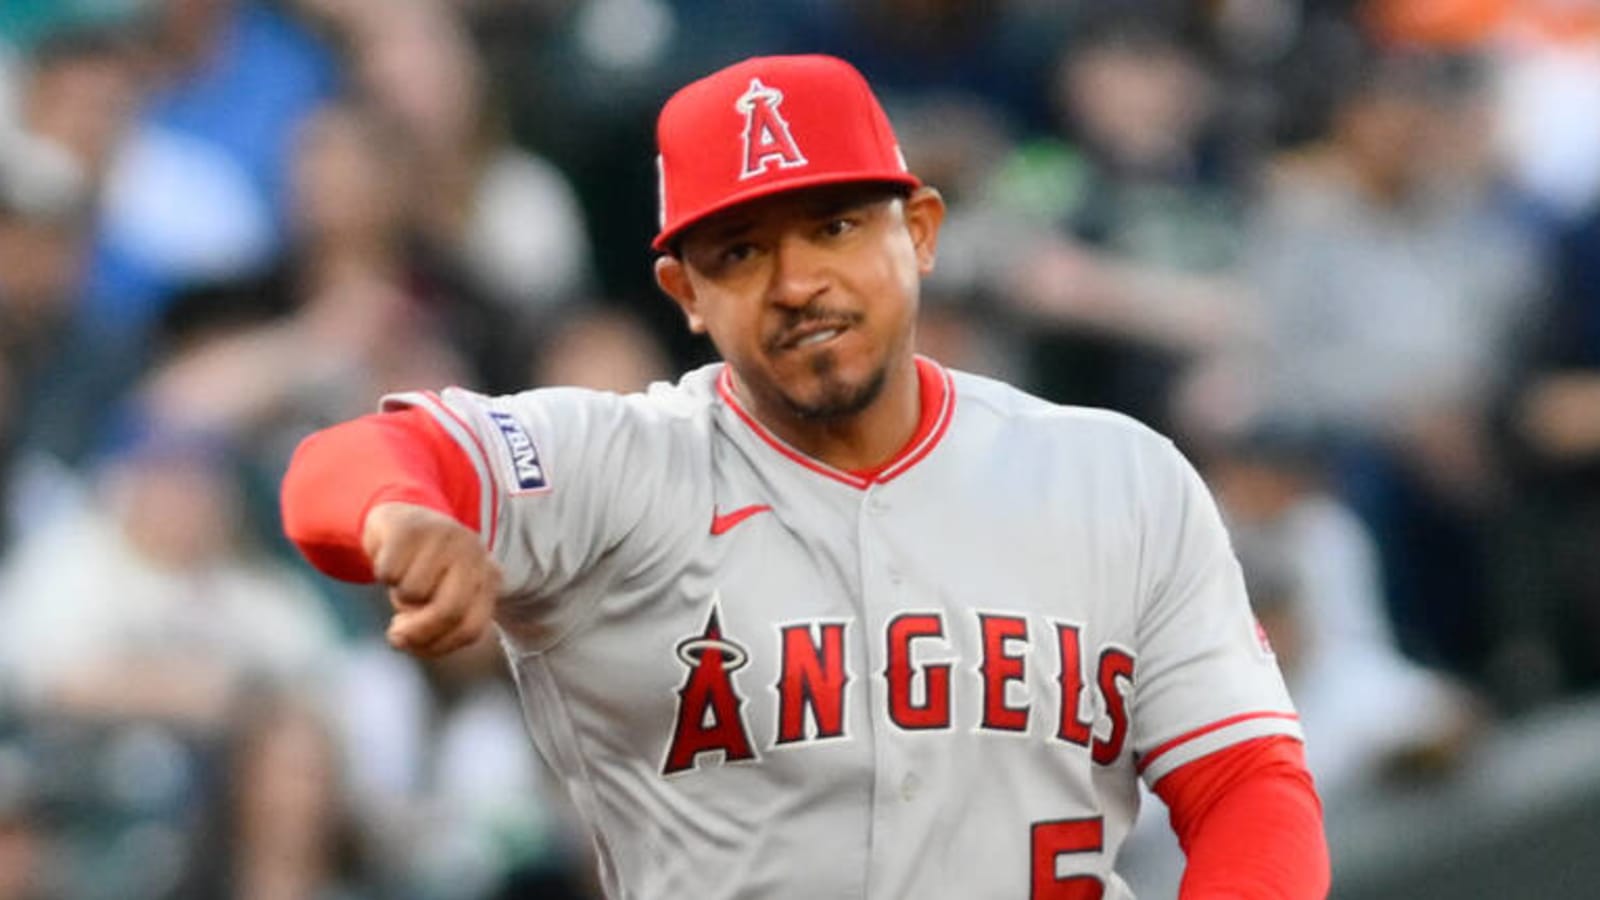 Angels decline options on two players